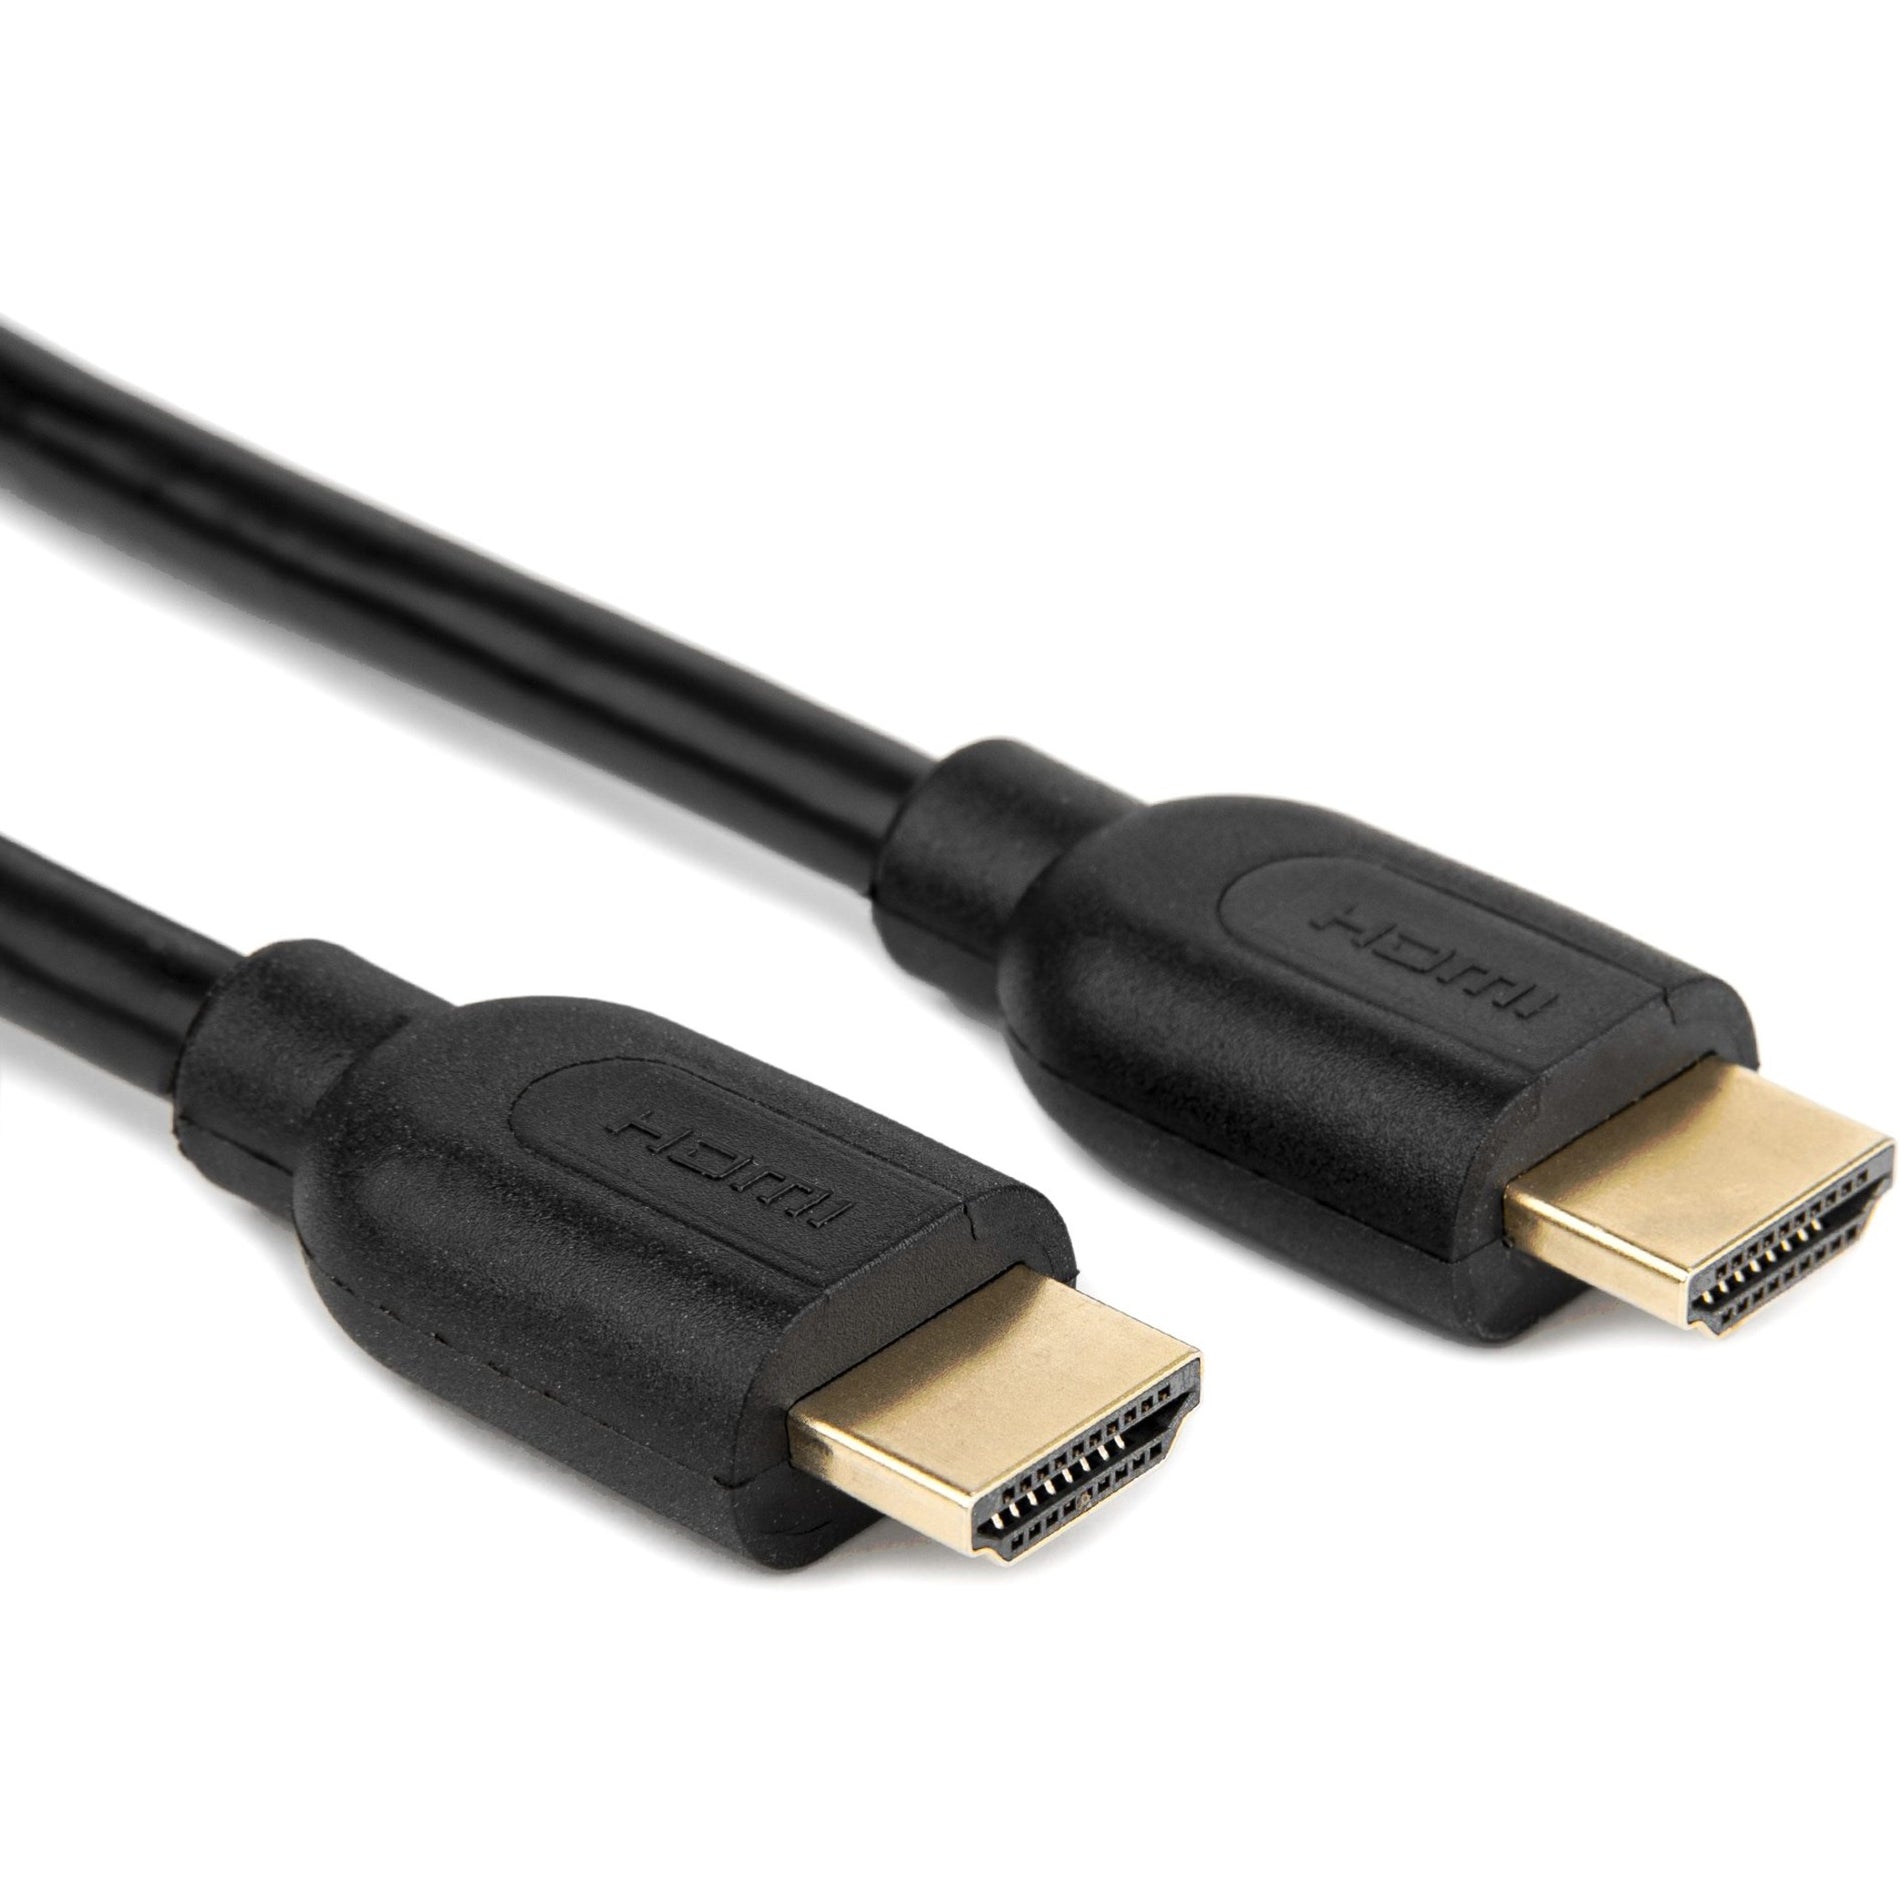 Rocstor Y10C108-B1 Premium High Speed HDMI Cable with Ethernet, 10ft, 10.2 Gbit/s Data Transfer Rate, Gold Plated Connectors